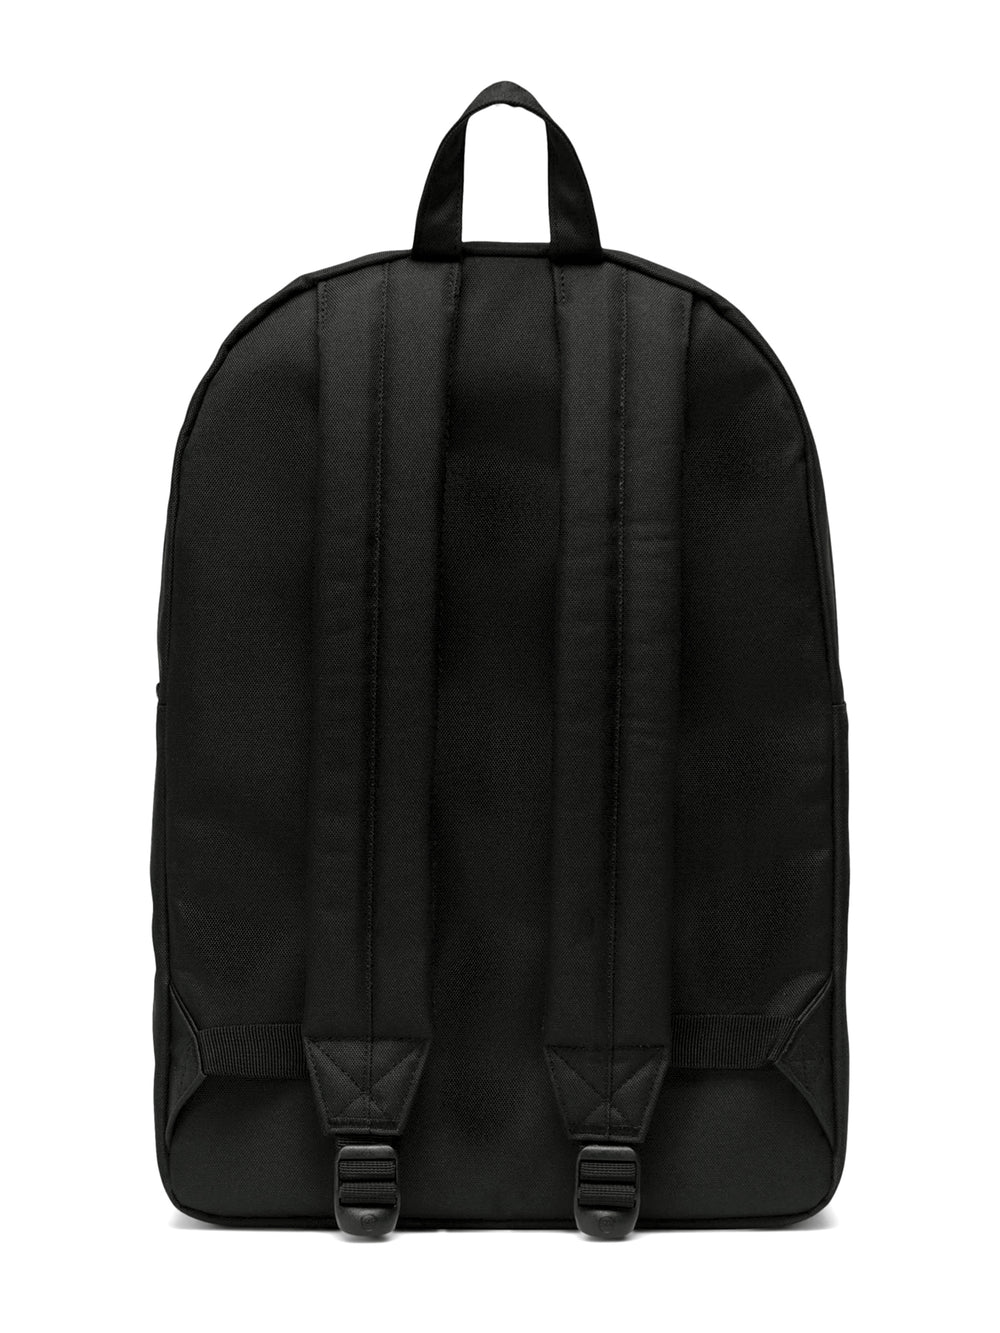 HERSCHEL SUPPLY CO. MIDWAY 25L BACKPACK  - CLEARANCE